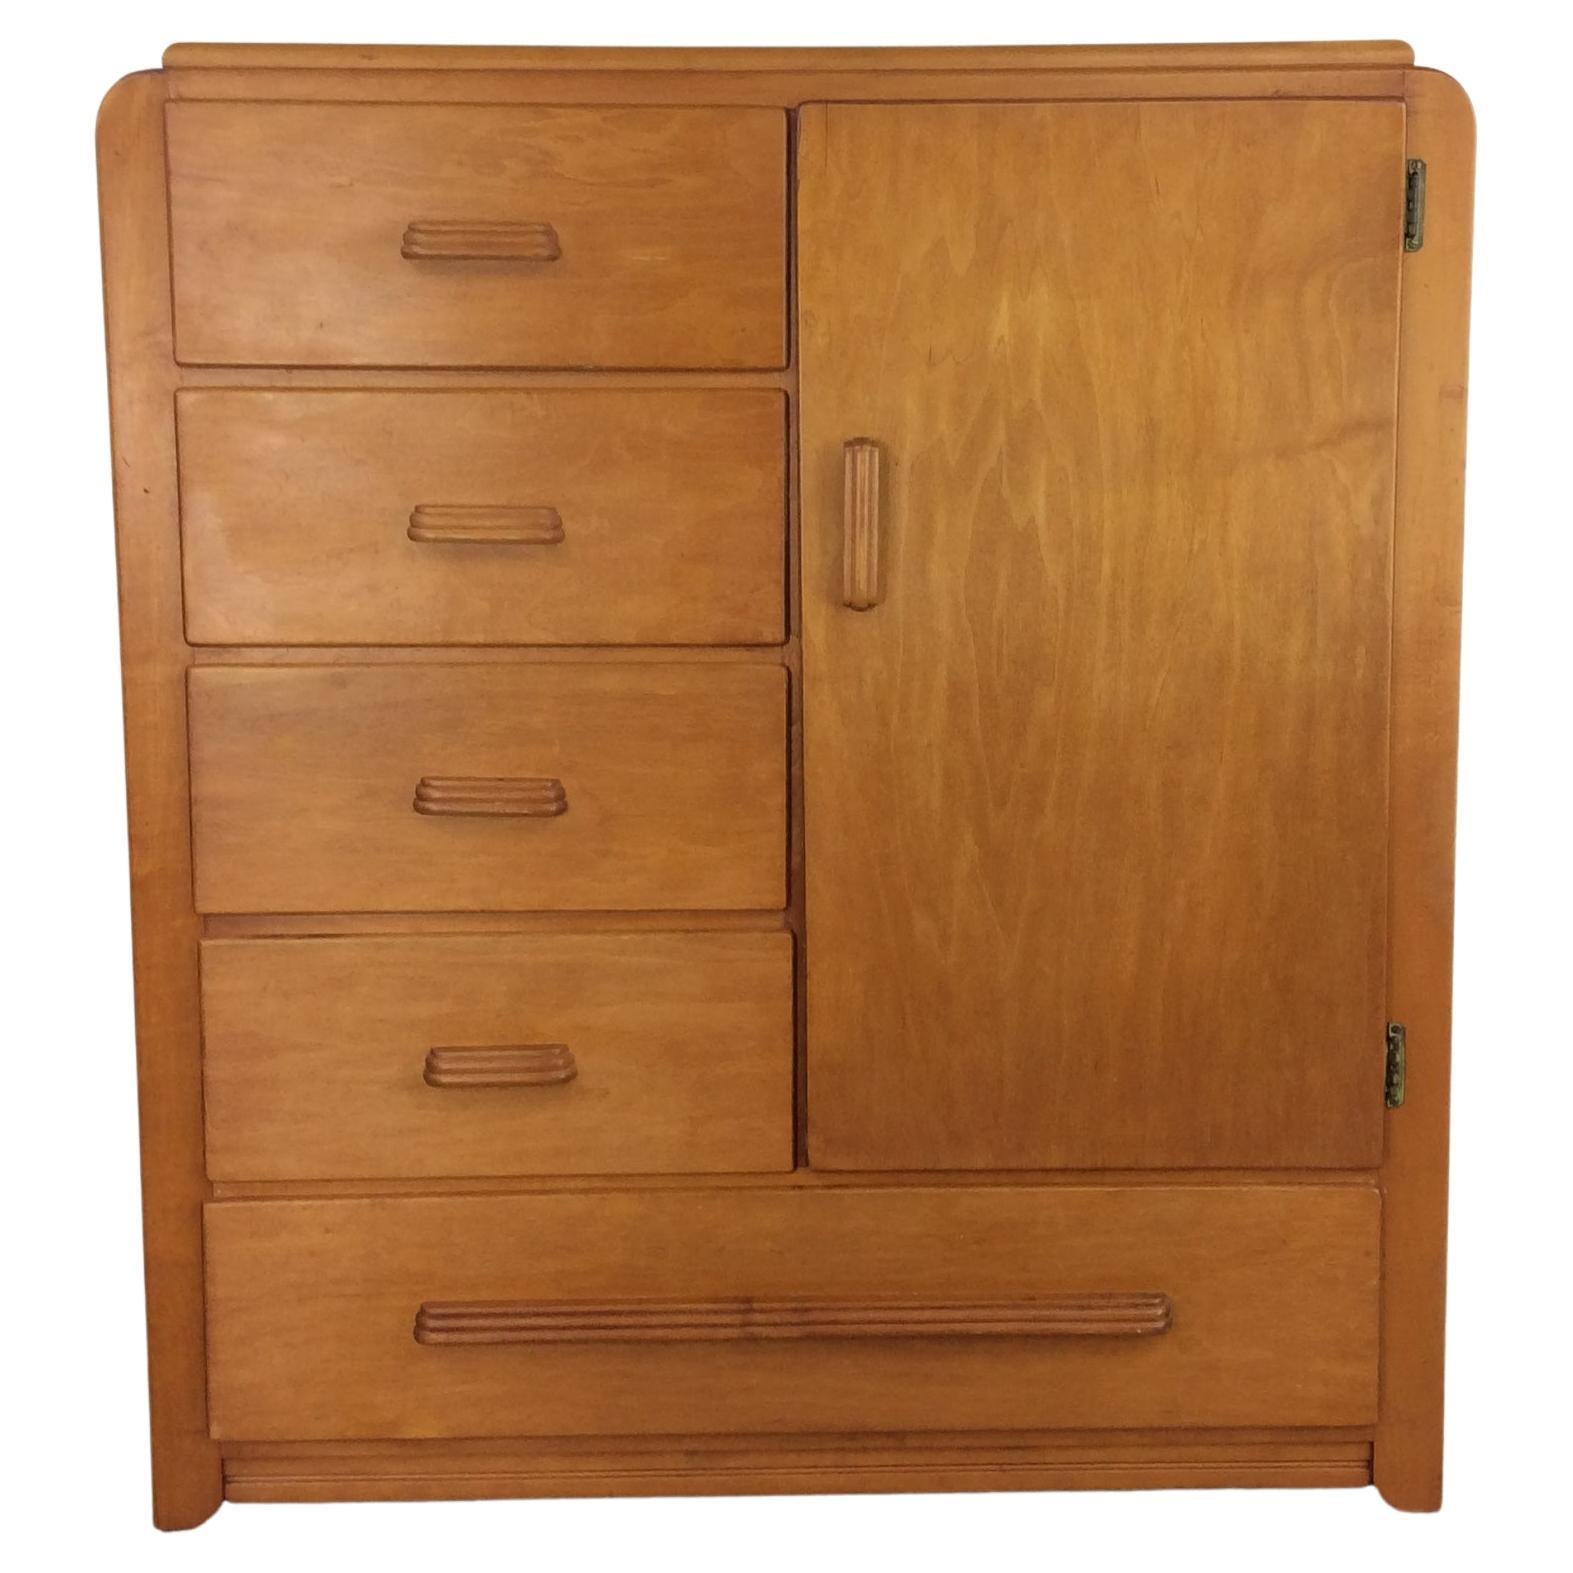 Art Deco Style Compact Armoire with 5 Drawers